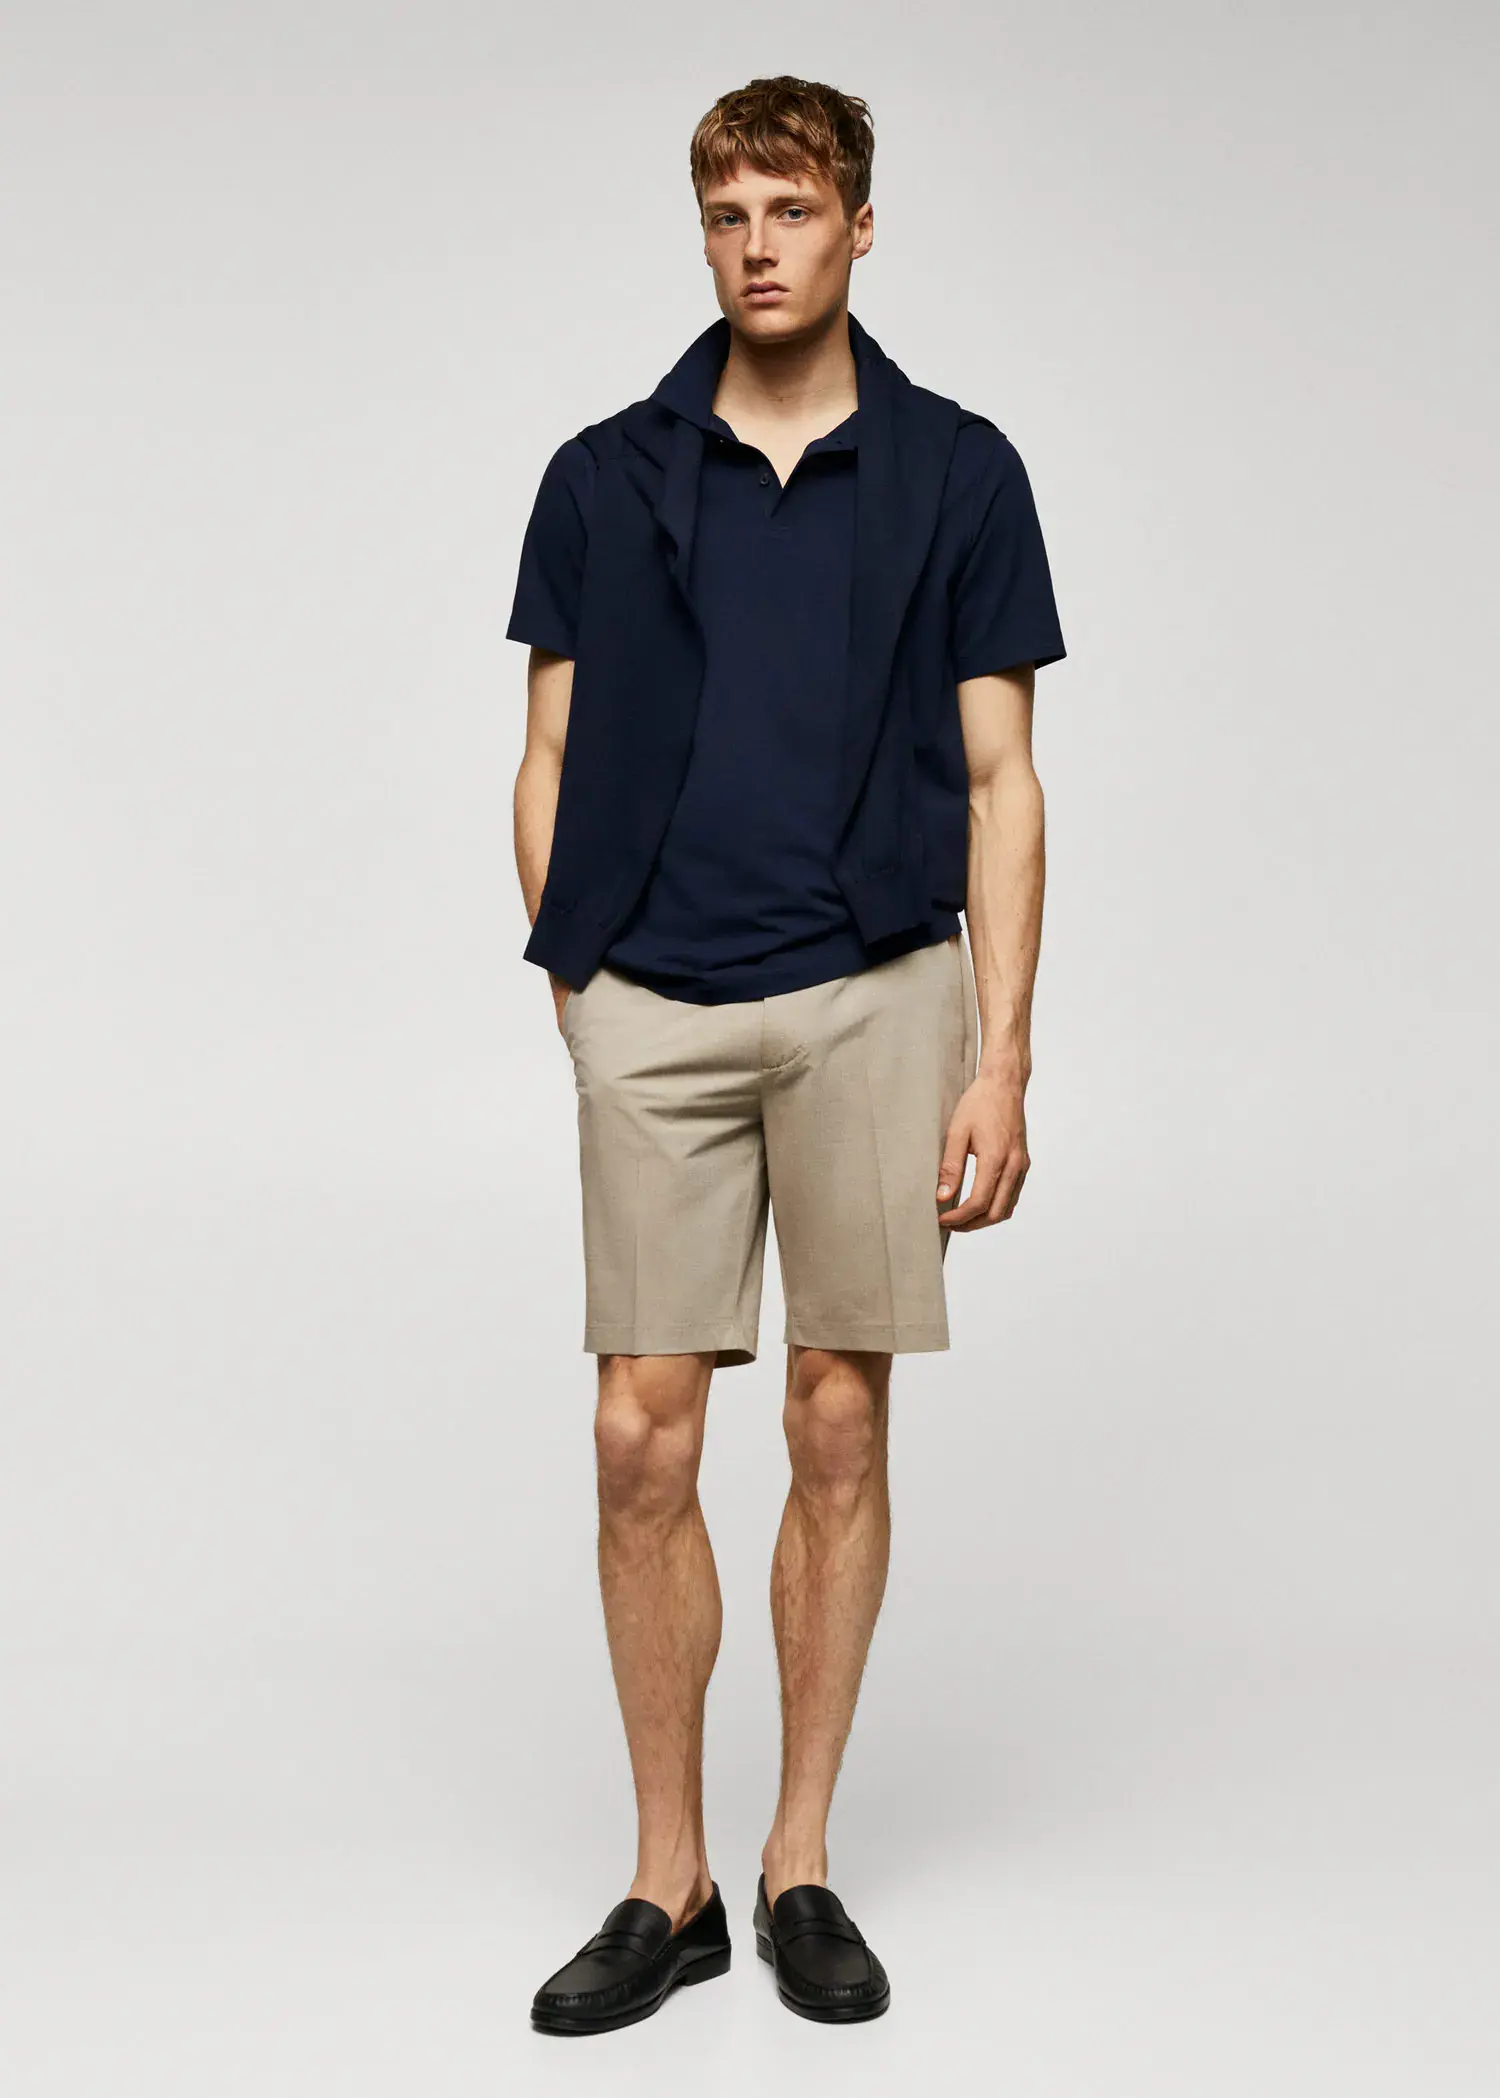 Mango Slim-fit textured cotton polo shirt. a young man in shorts and a black shirt. 